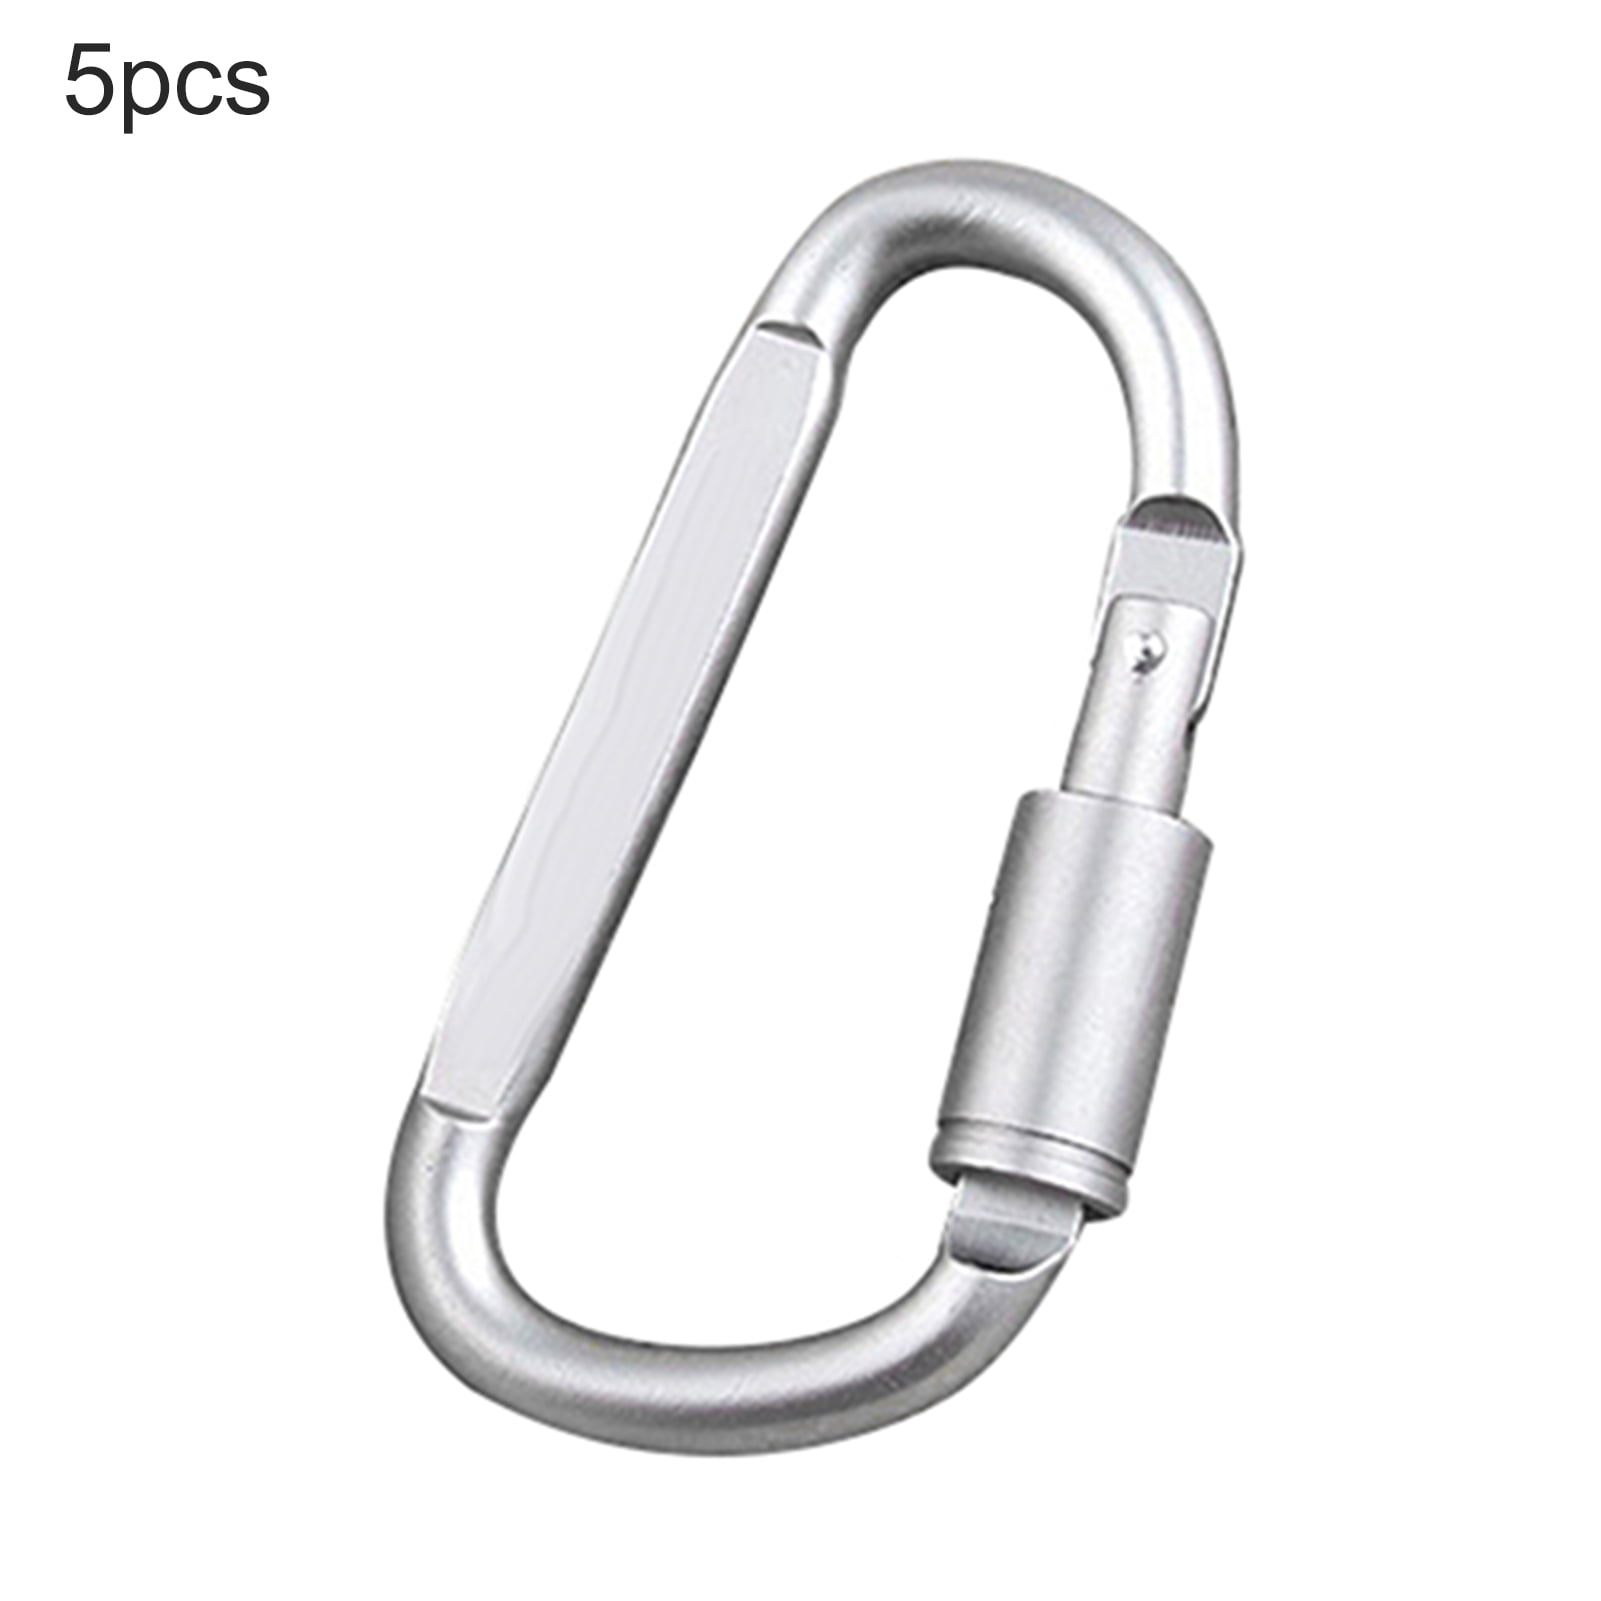 Details about   Stainless Steel Carabiner Clips D Ring Locking Strong Caribeaner Camping Hook CF 